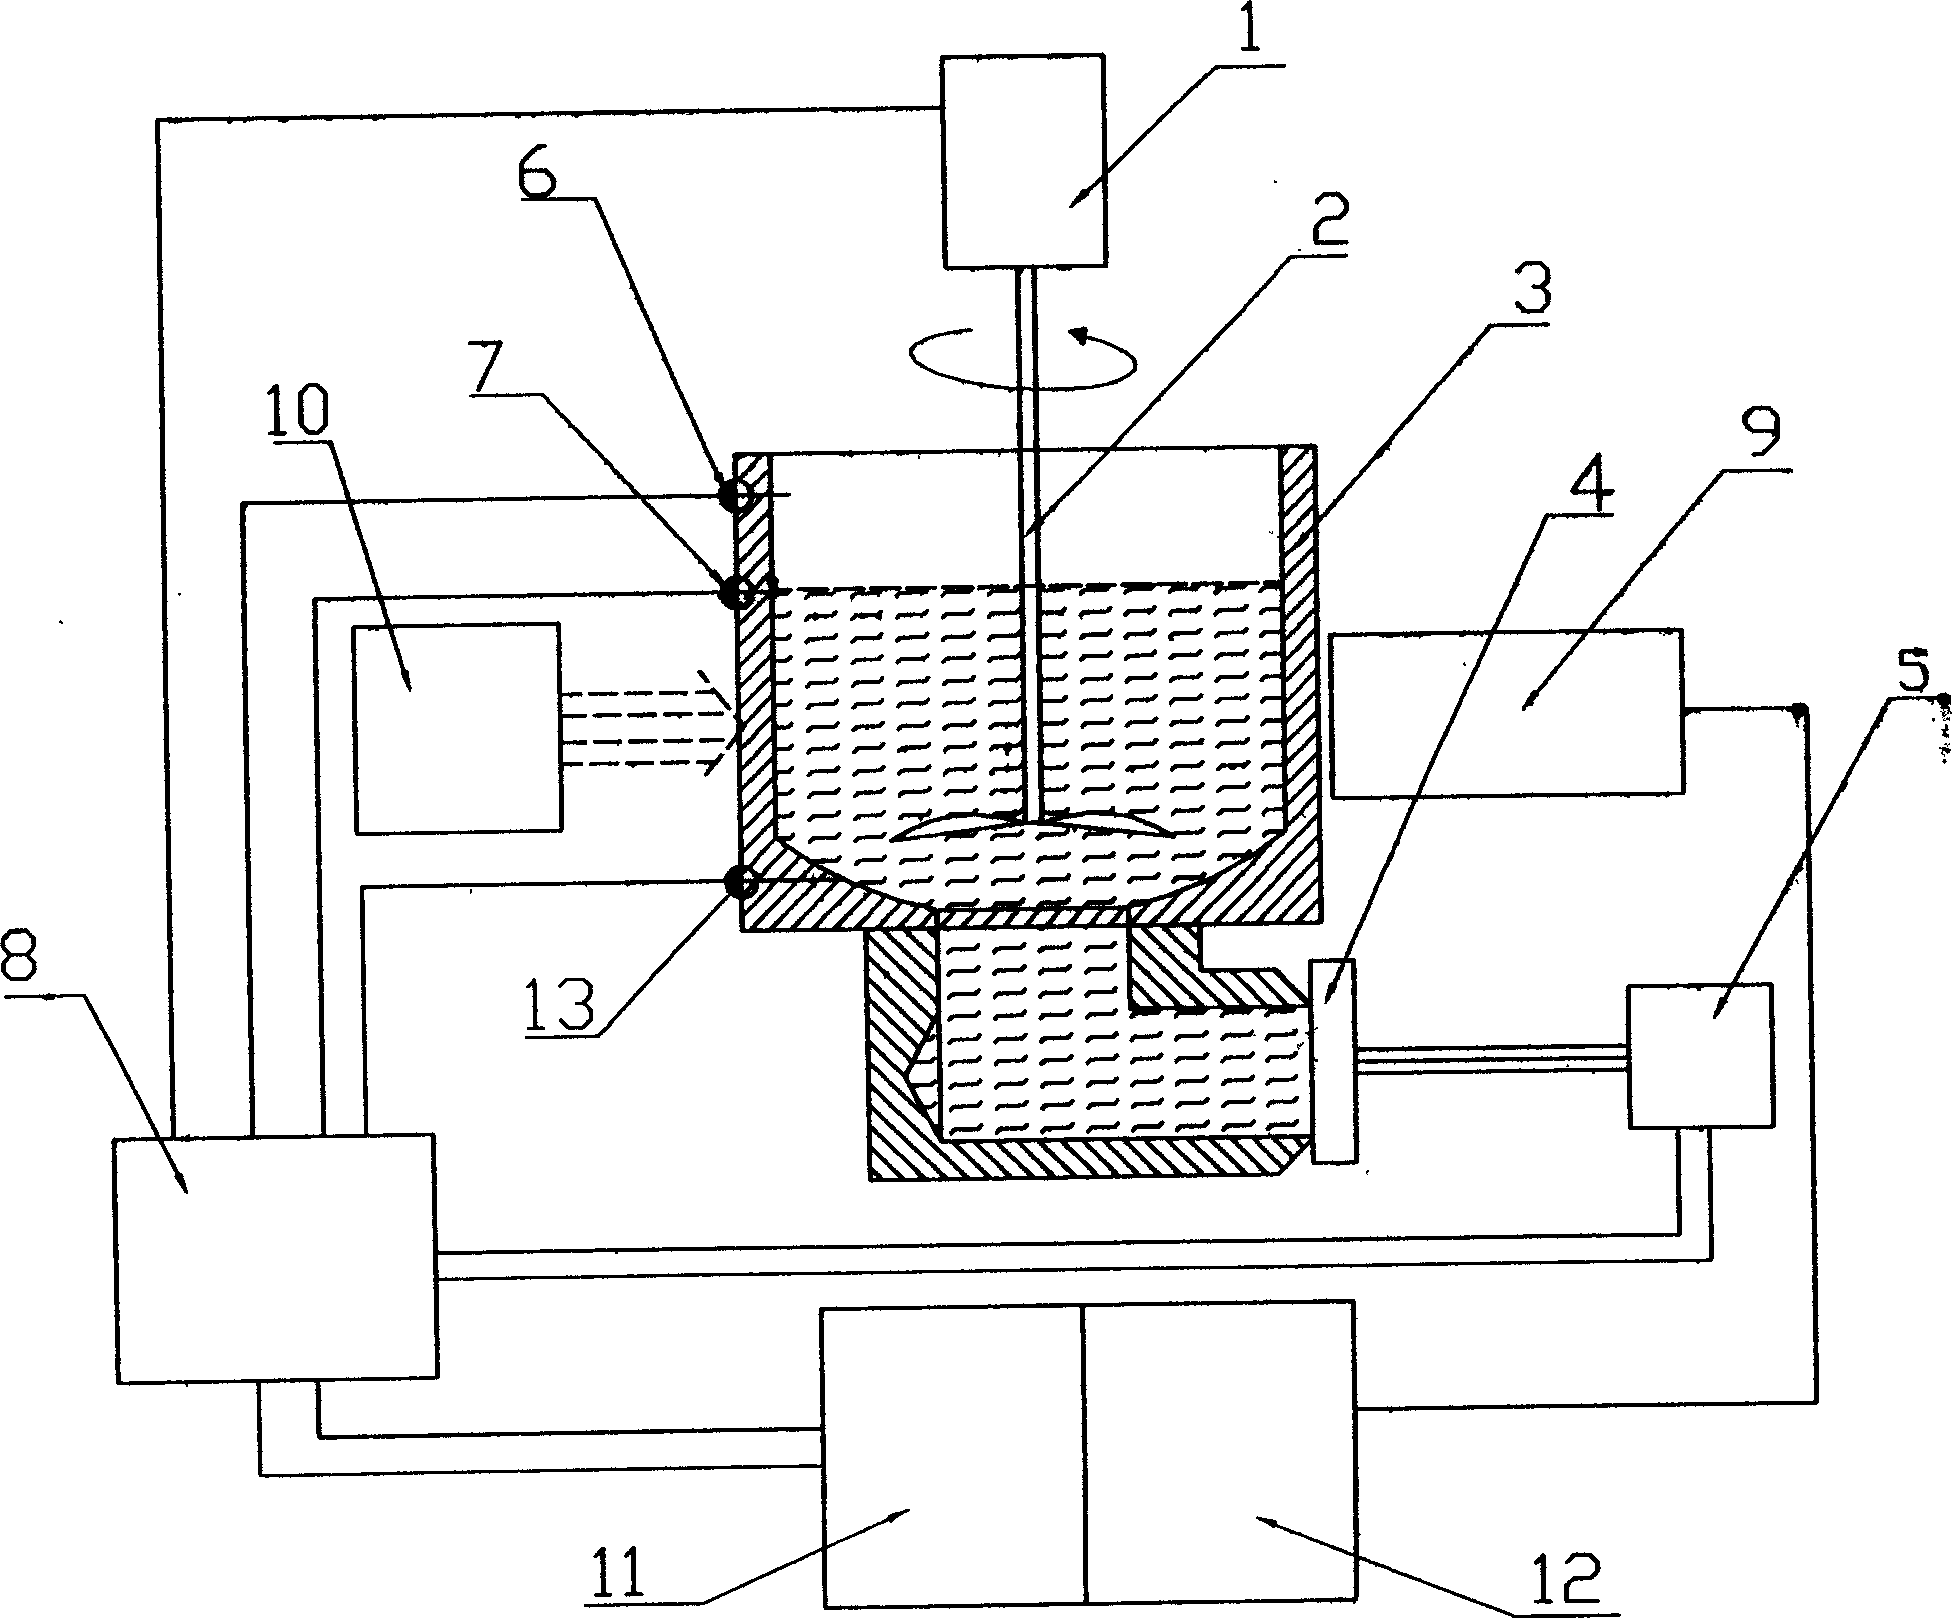 Apparatus for continuous and automatic measurement of radial flow sediment content